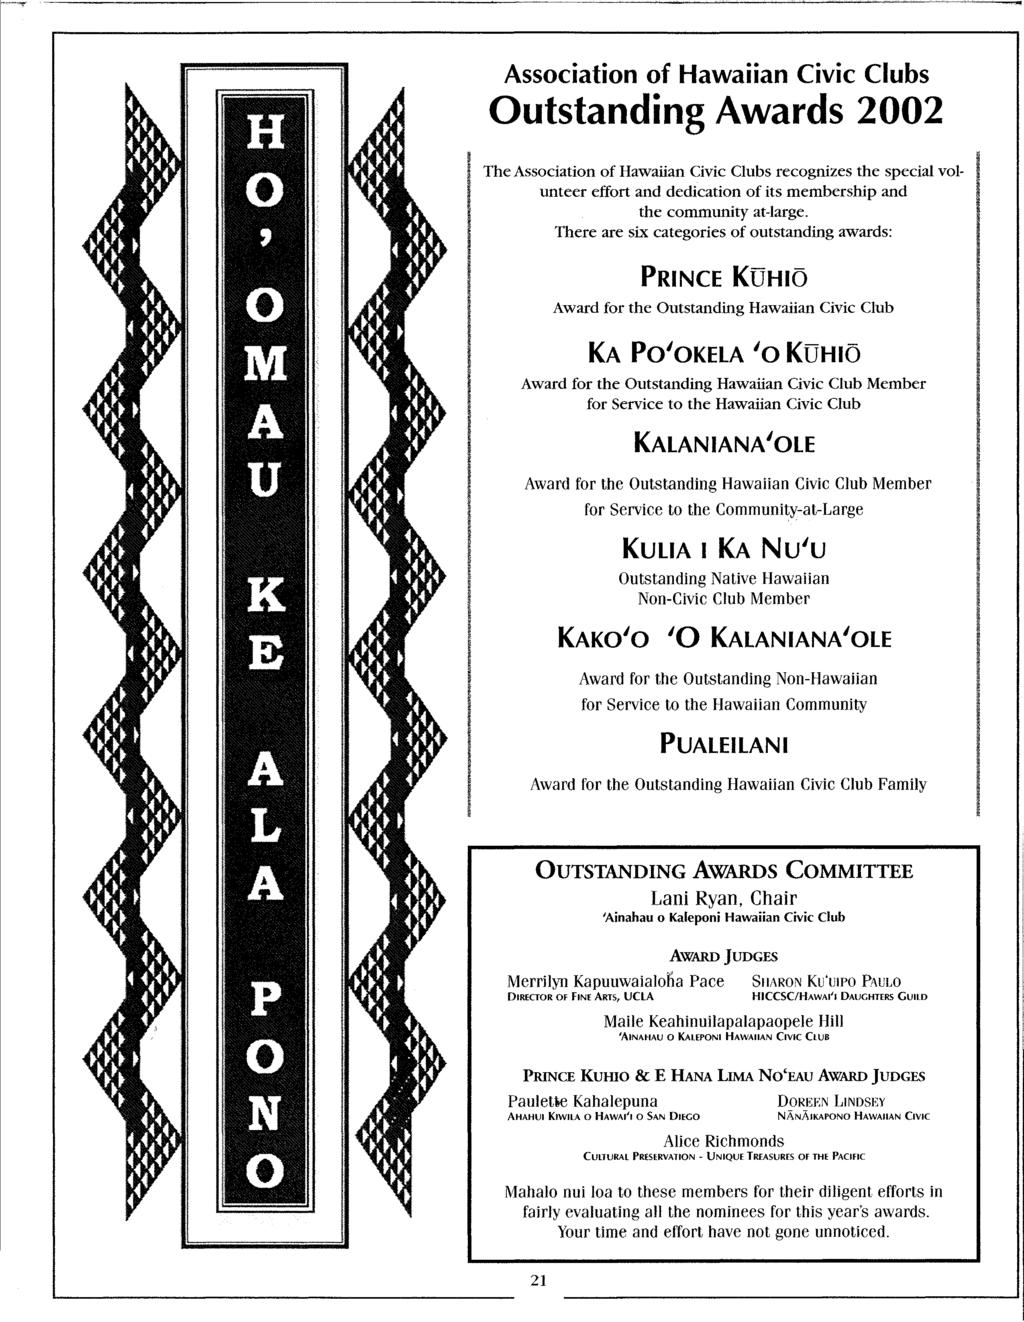 Association of Hawaiian Civic Clubs Outstanding Awards 2002 The Association of Hawaiian Civic Clubs recognizes the special volunteer effort and dedication of its membership and the community at-large.